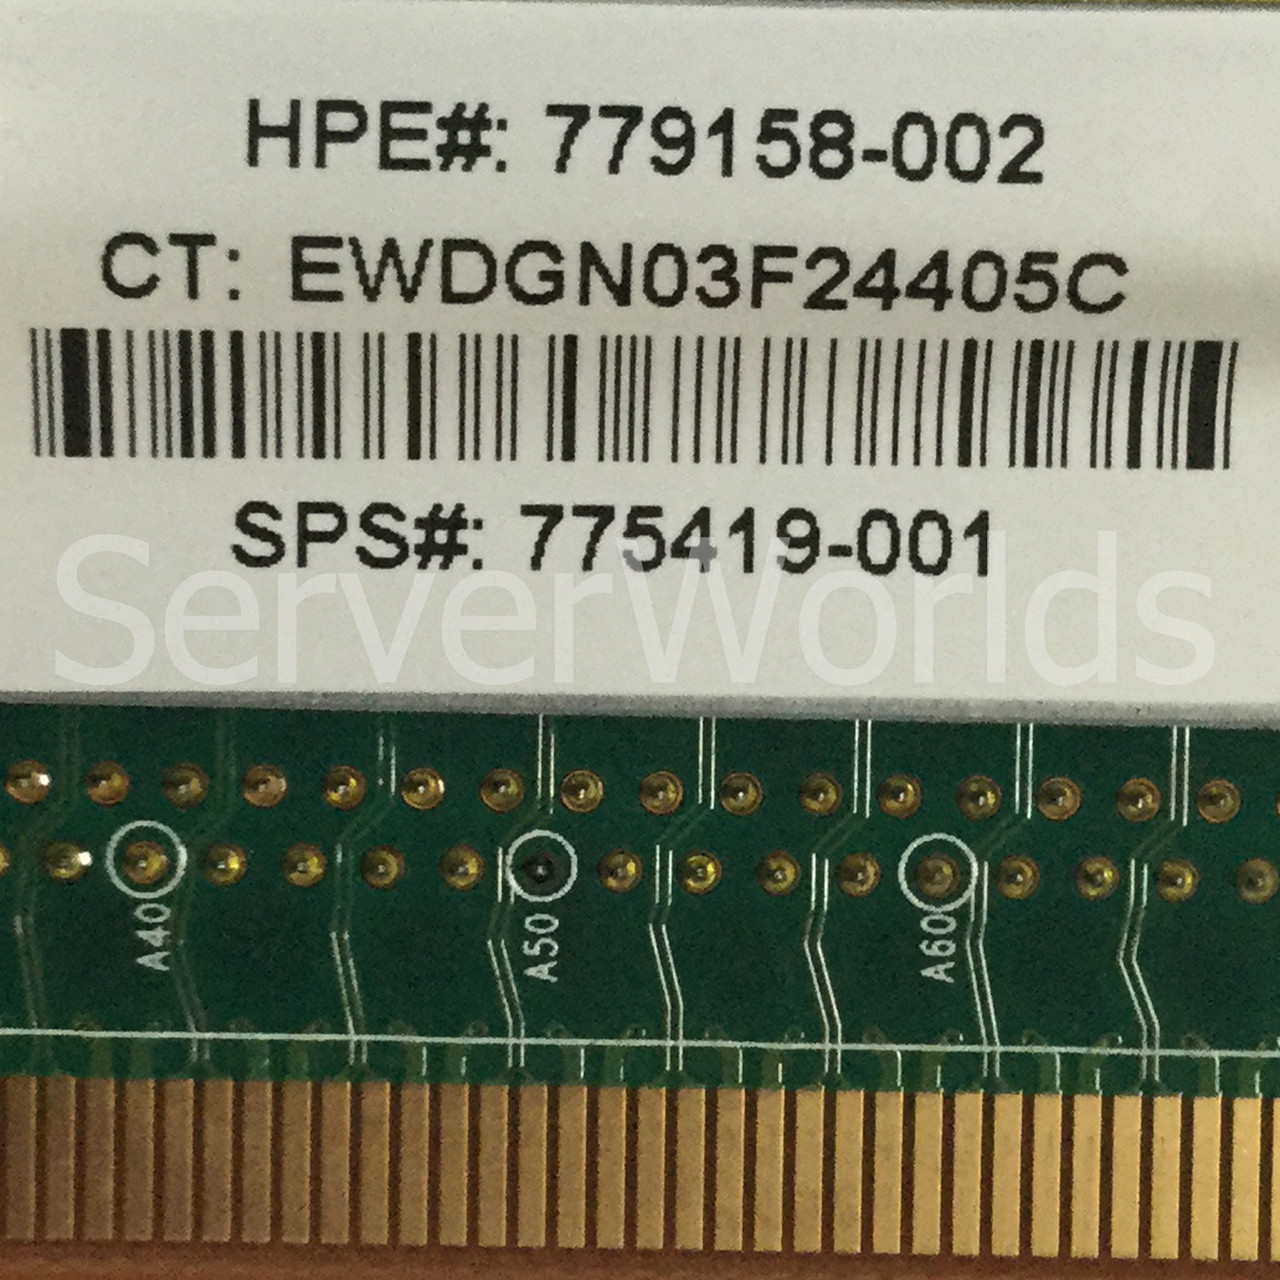 HPe 775419-001 DL360 Gen9 Secondary PCI Riser with bracket 743450-001 